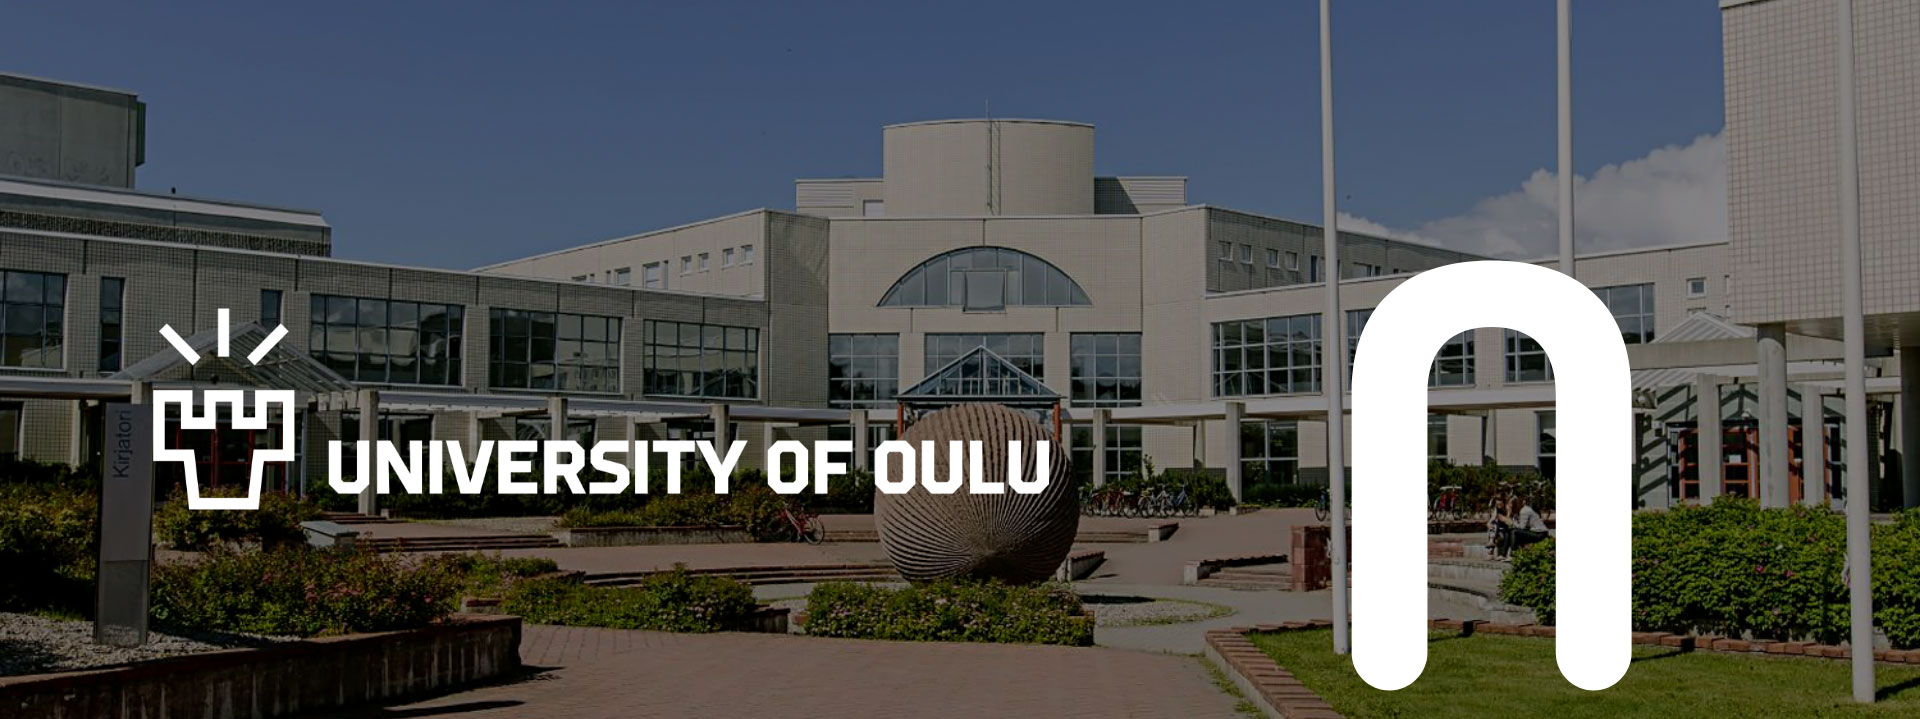 16-surprising-facts-about-university-of-oulu